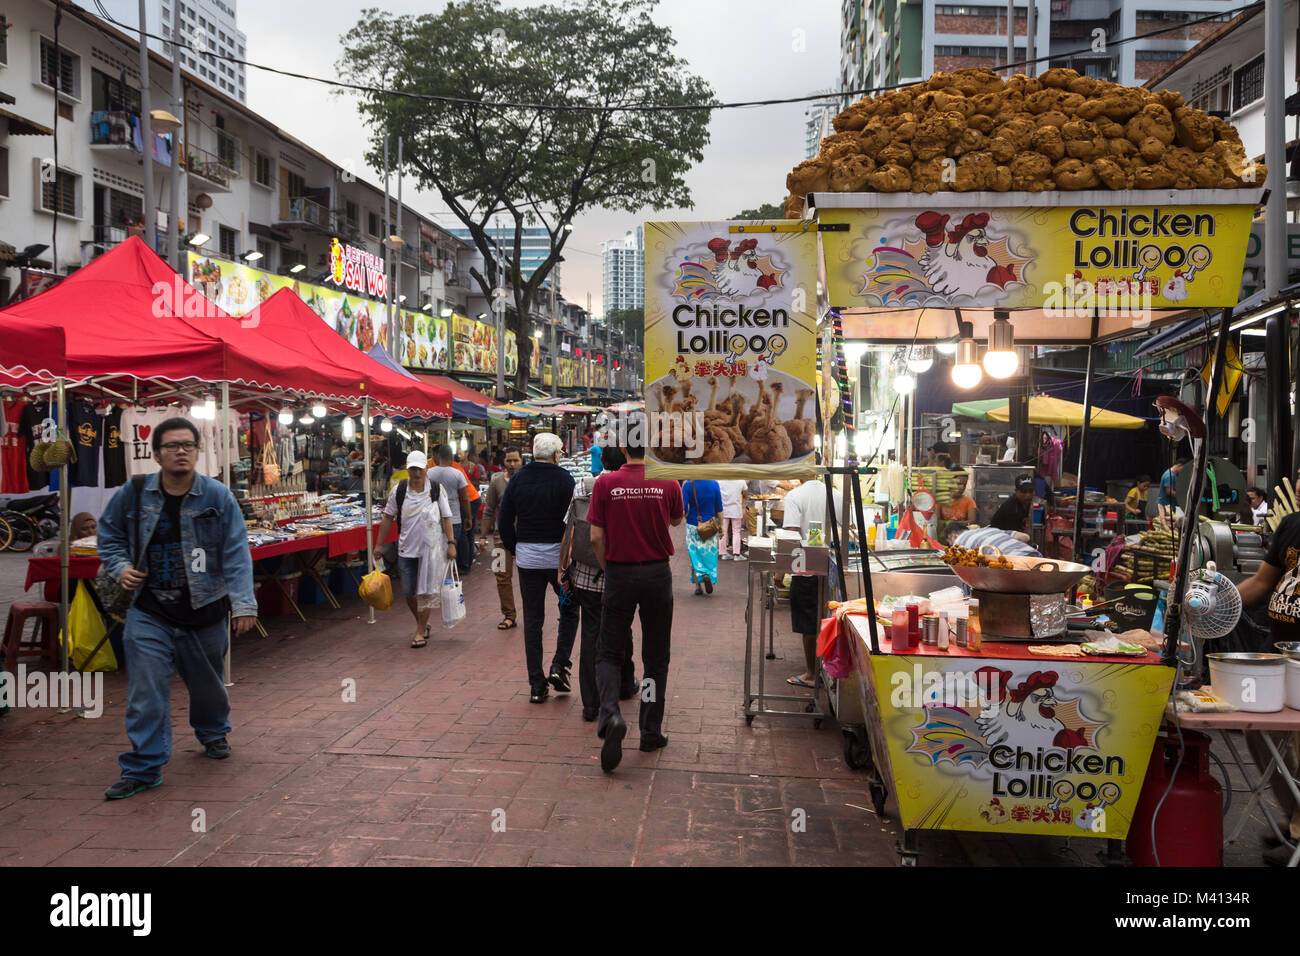 Kuala Lumpur, Malaysia - December 22 2017: Tourists and locals wander along Jalan Alor famous for its chinese food restaurant and street food stalls n Stock Photo